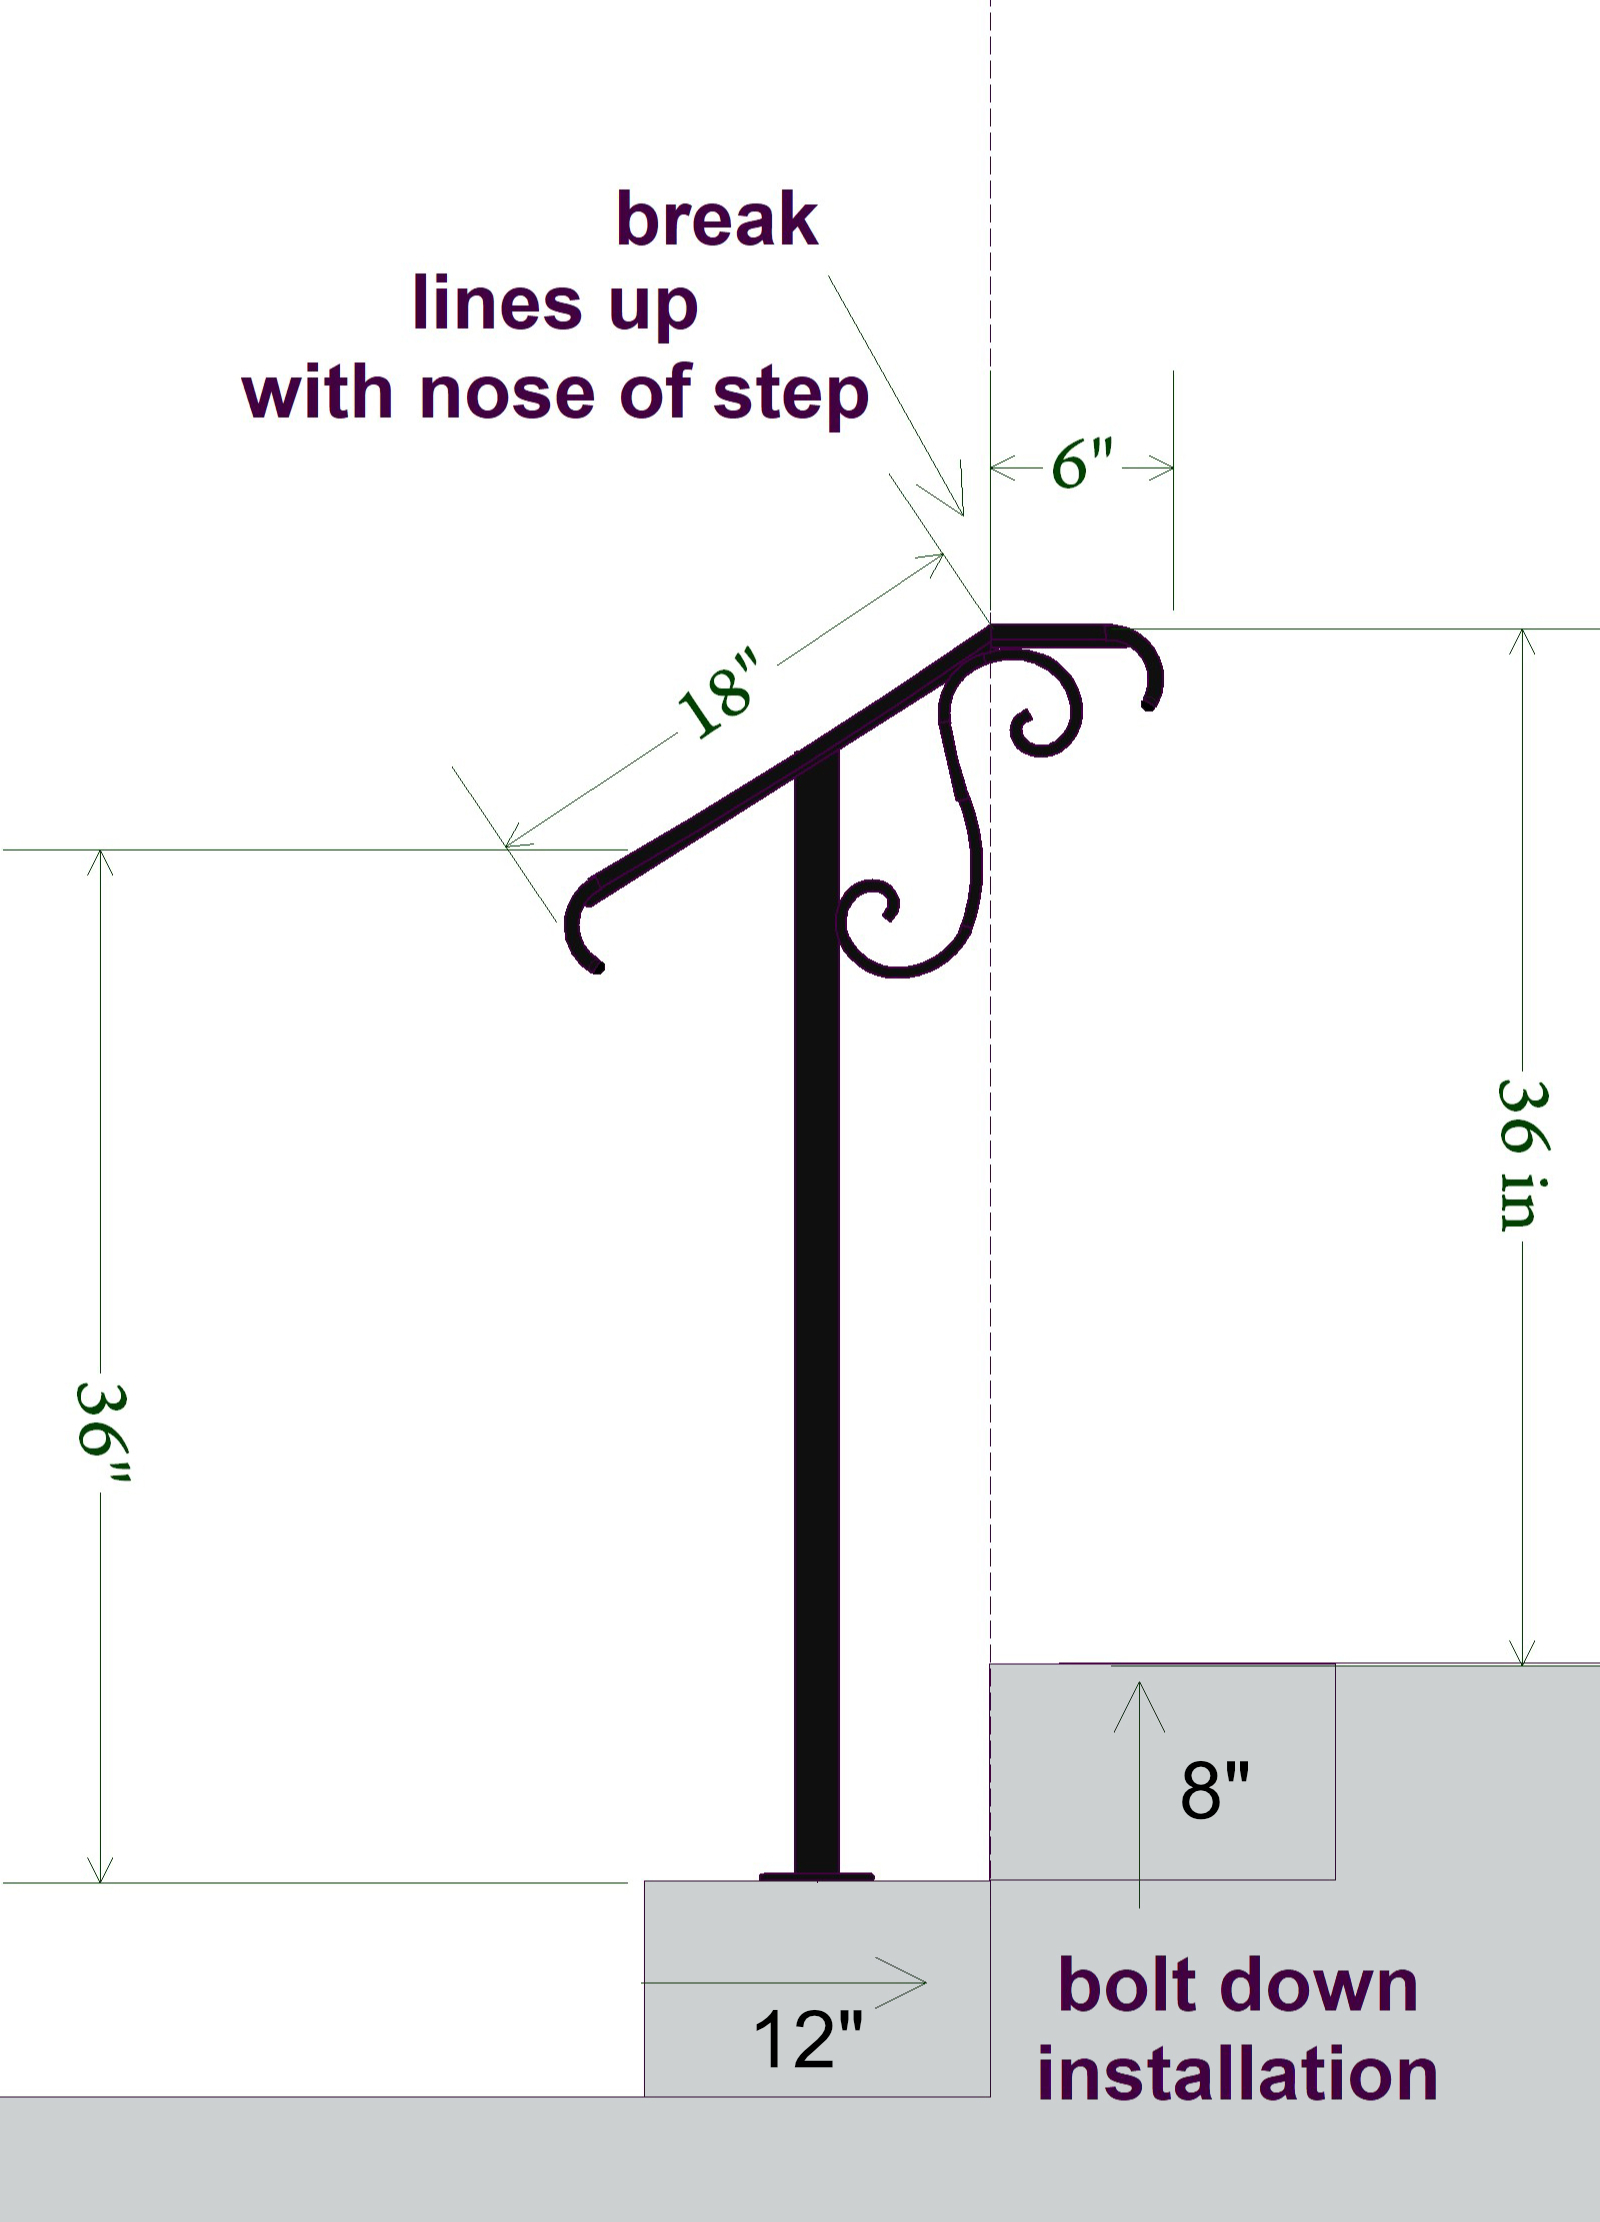 One POst Rail installed by bolting to surface of a stair. The drawing is technical, with some measurment details.